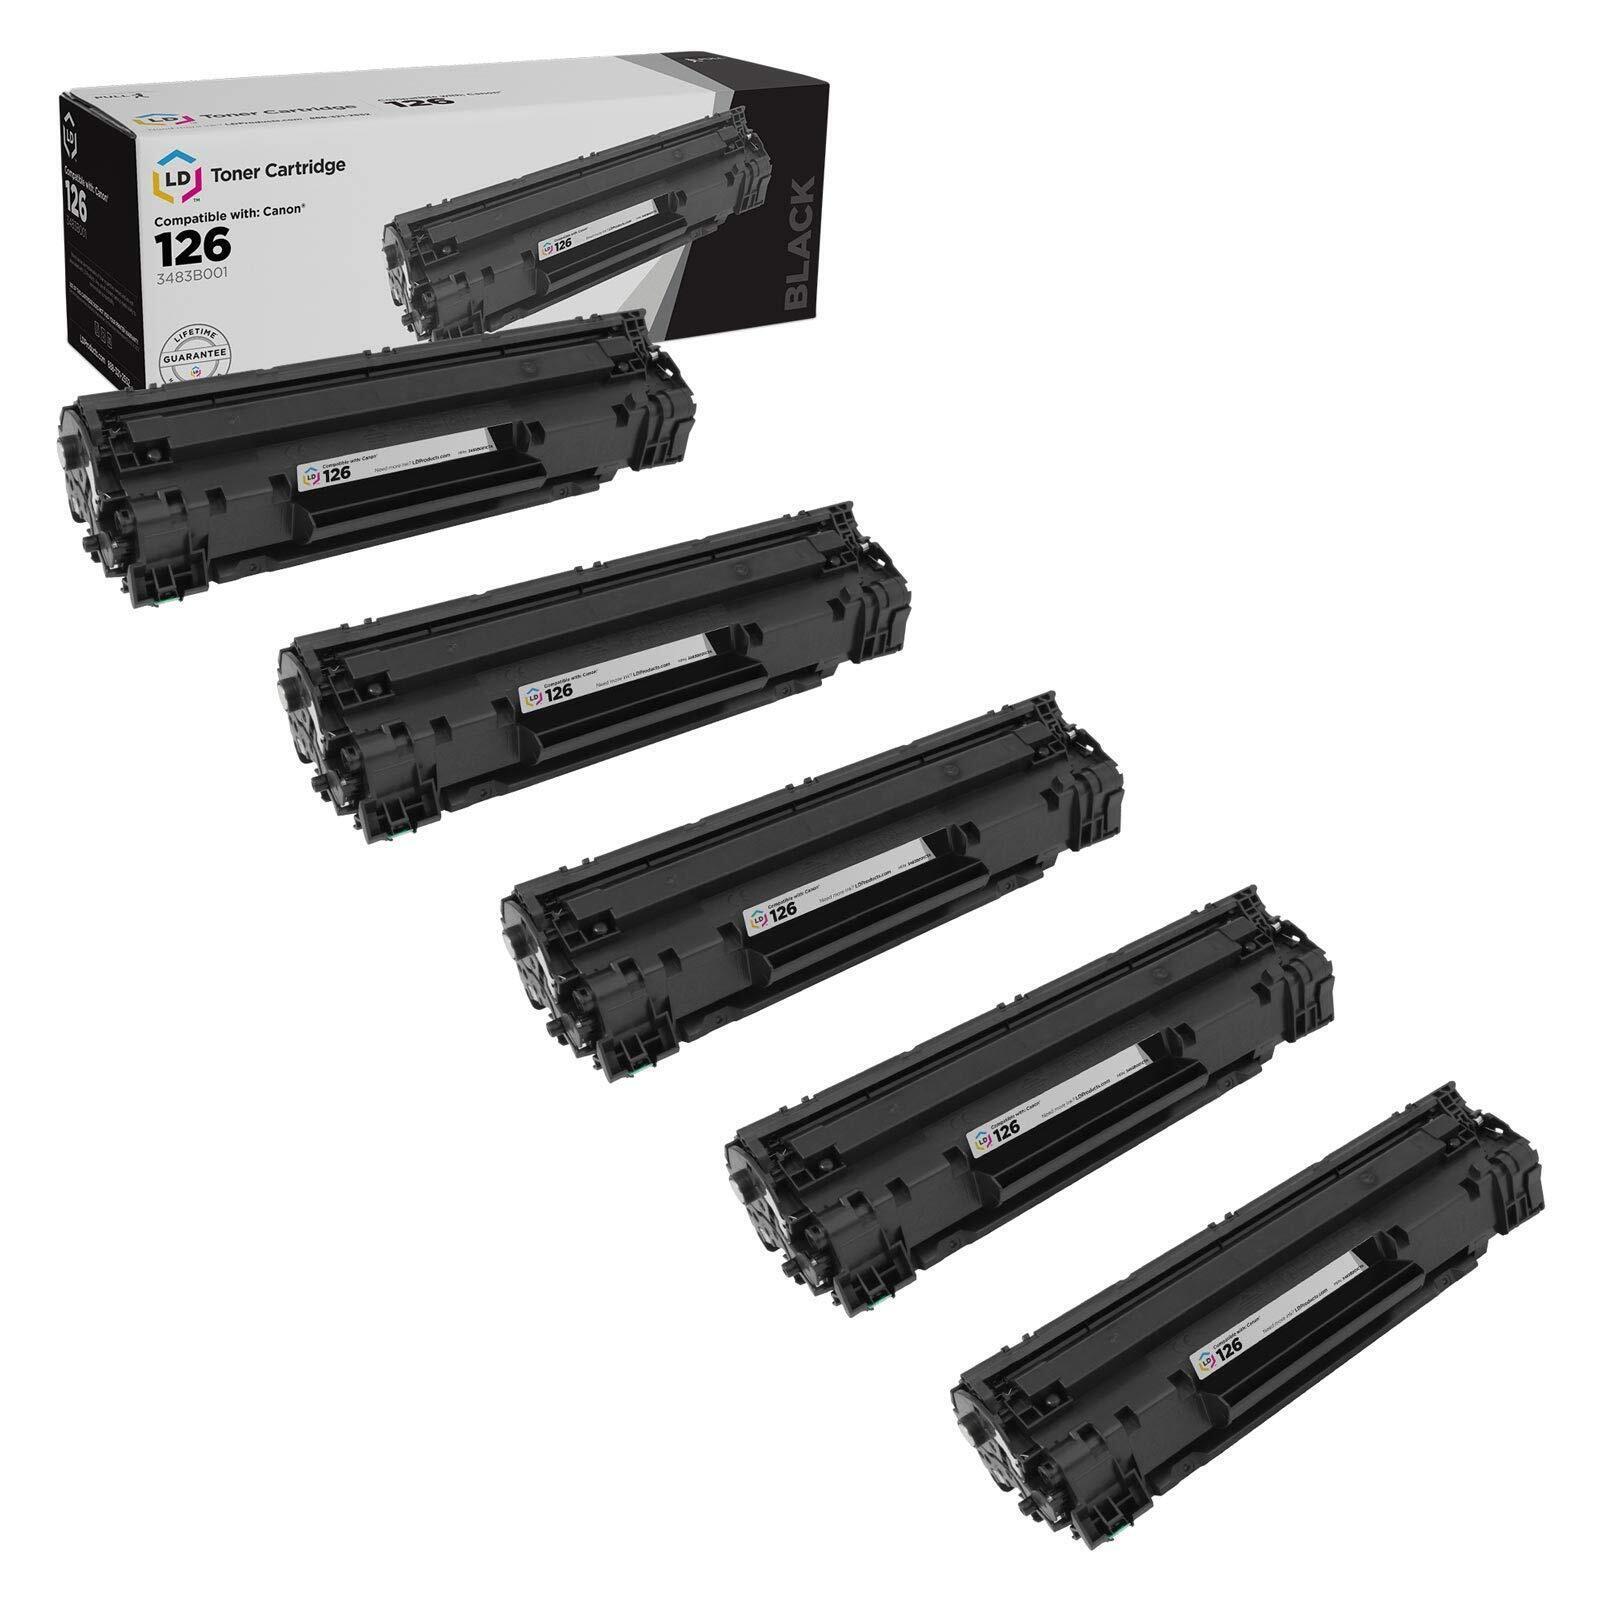 LD Products Compatible Toner Cartridge for Canon 126 3483B001 Black 5pk